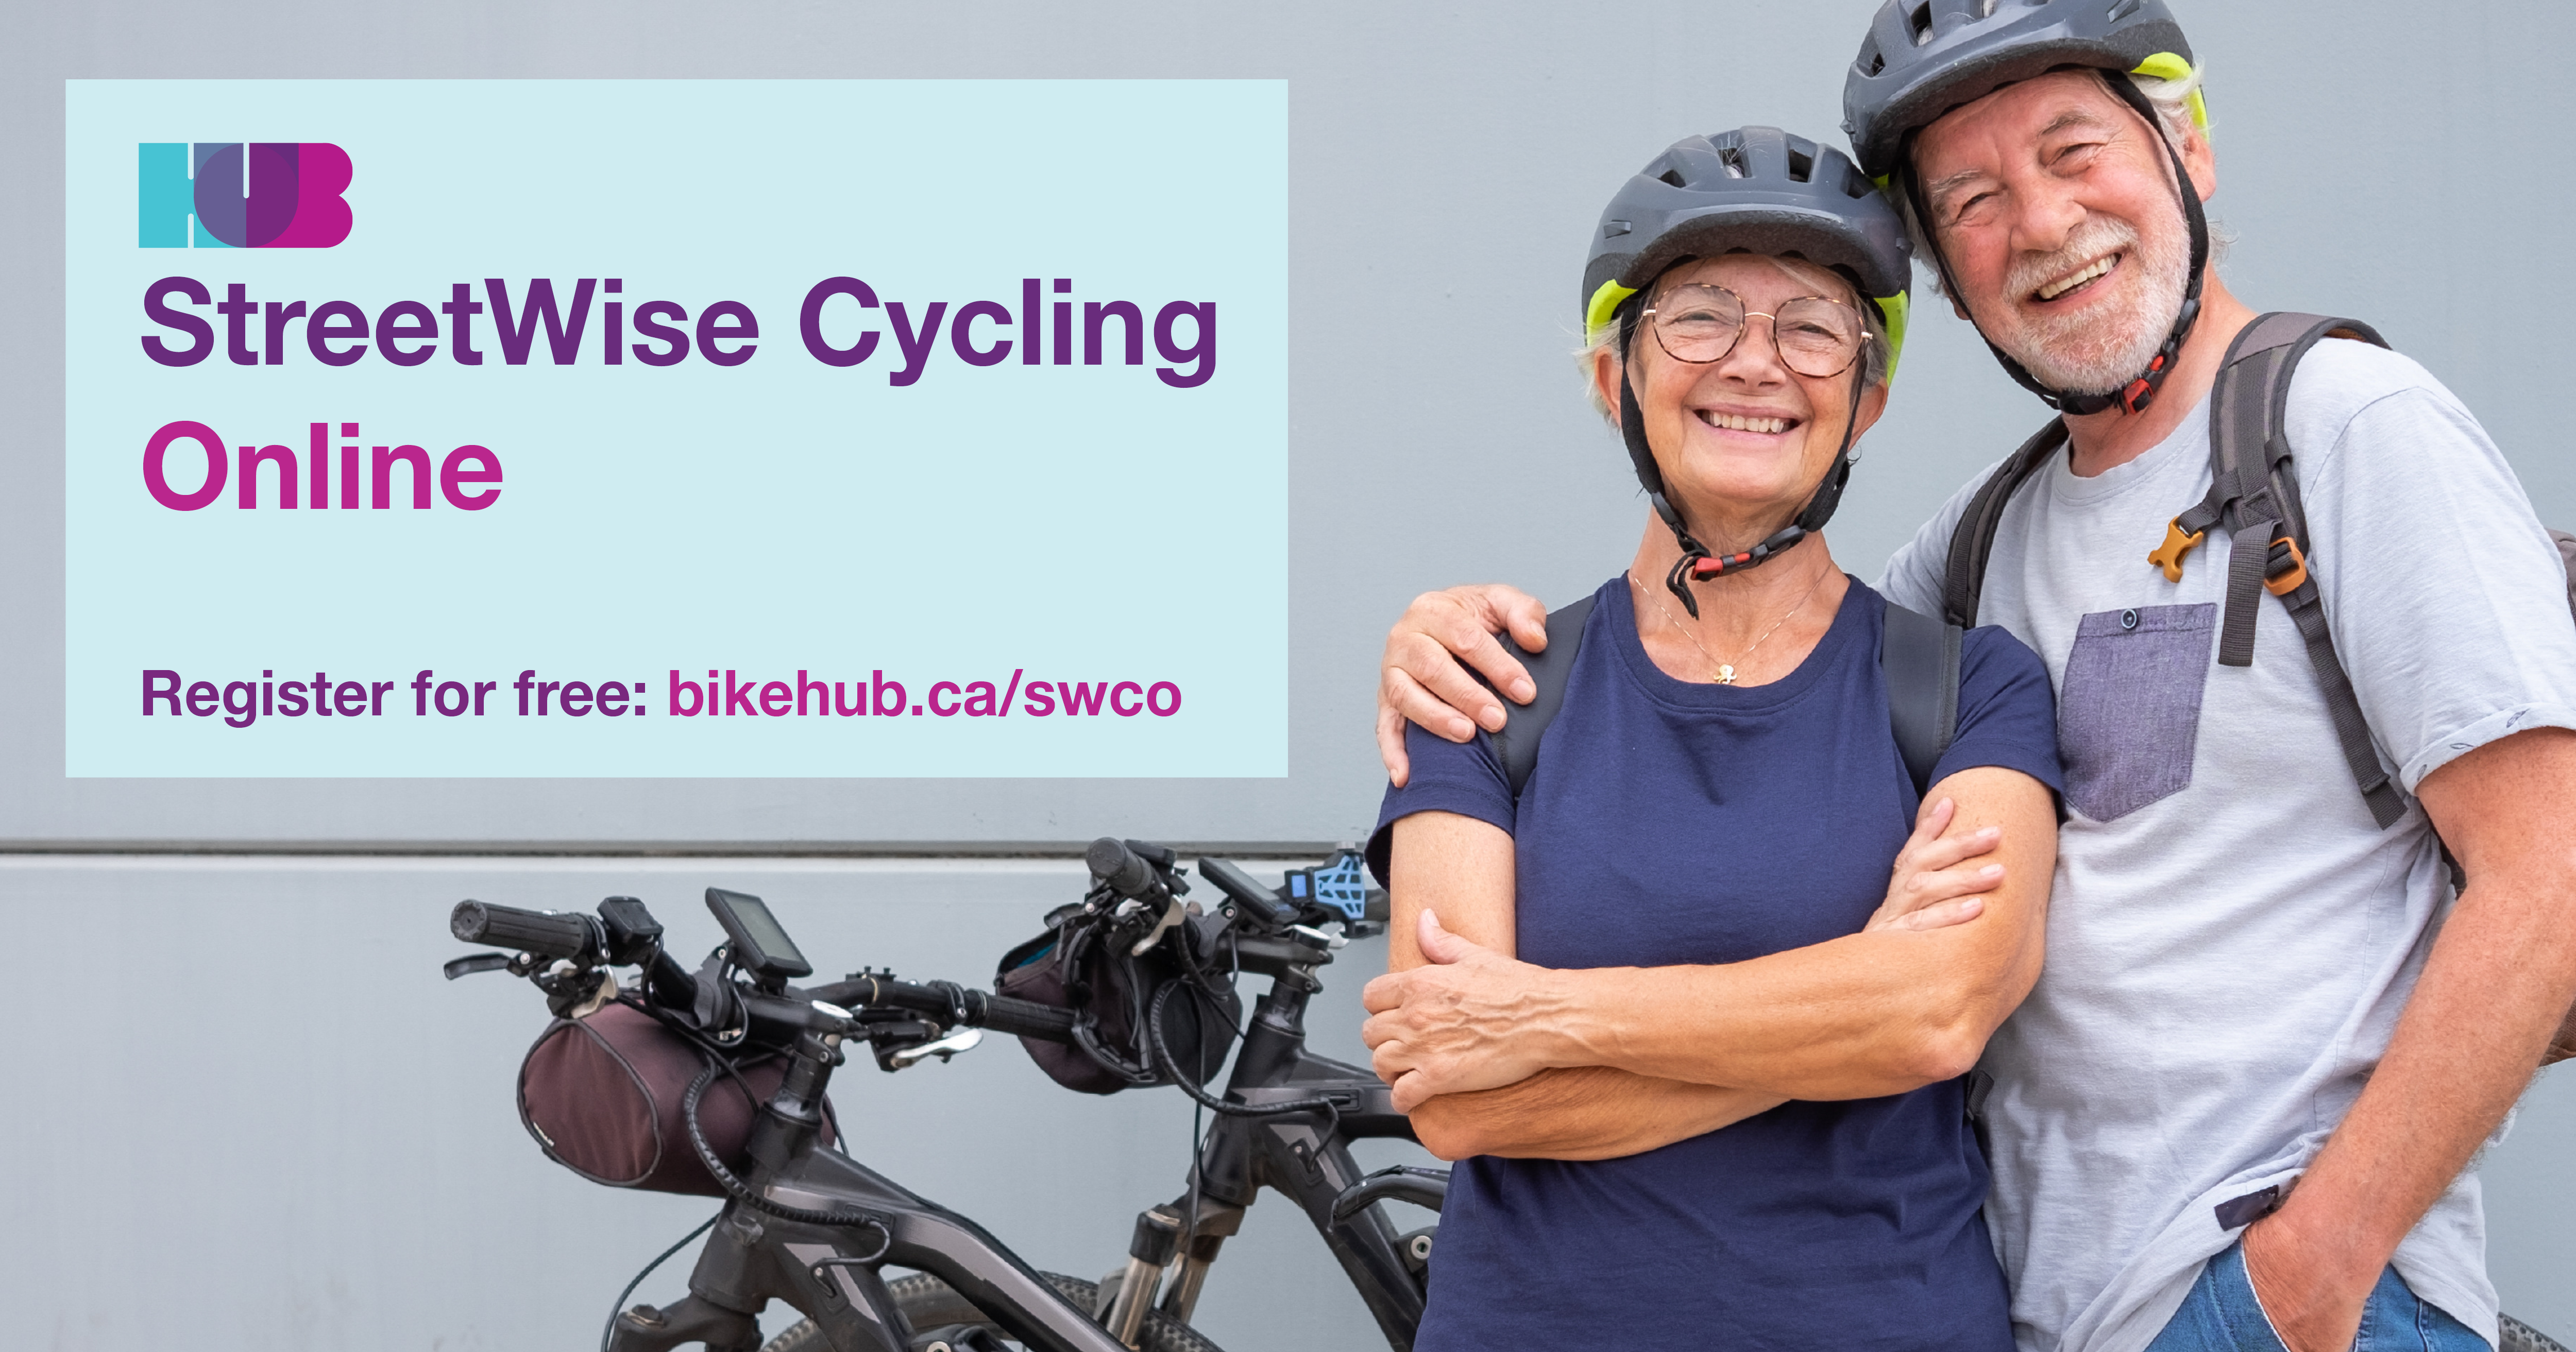 StreetWise Cycling Online Media Kit HUB Cycling Bike Events, Education, Action in Metro Vancouver